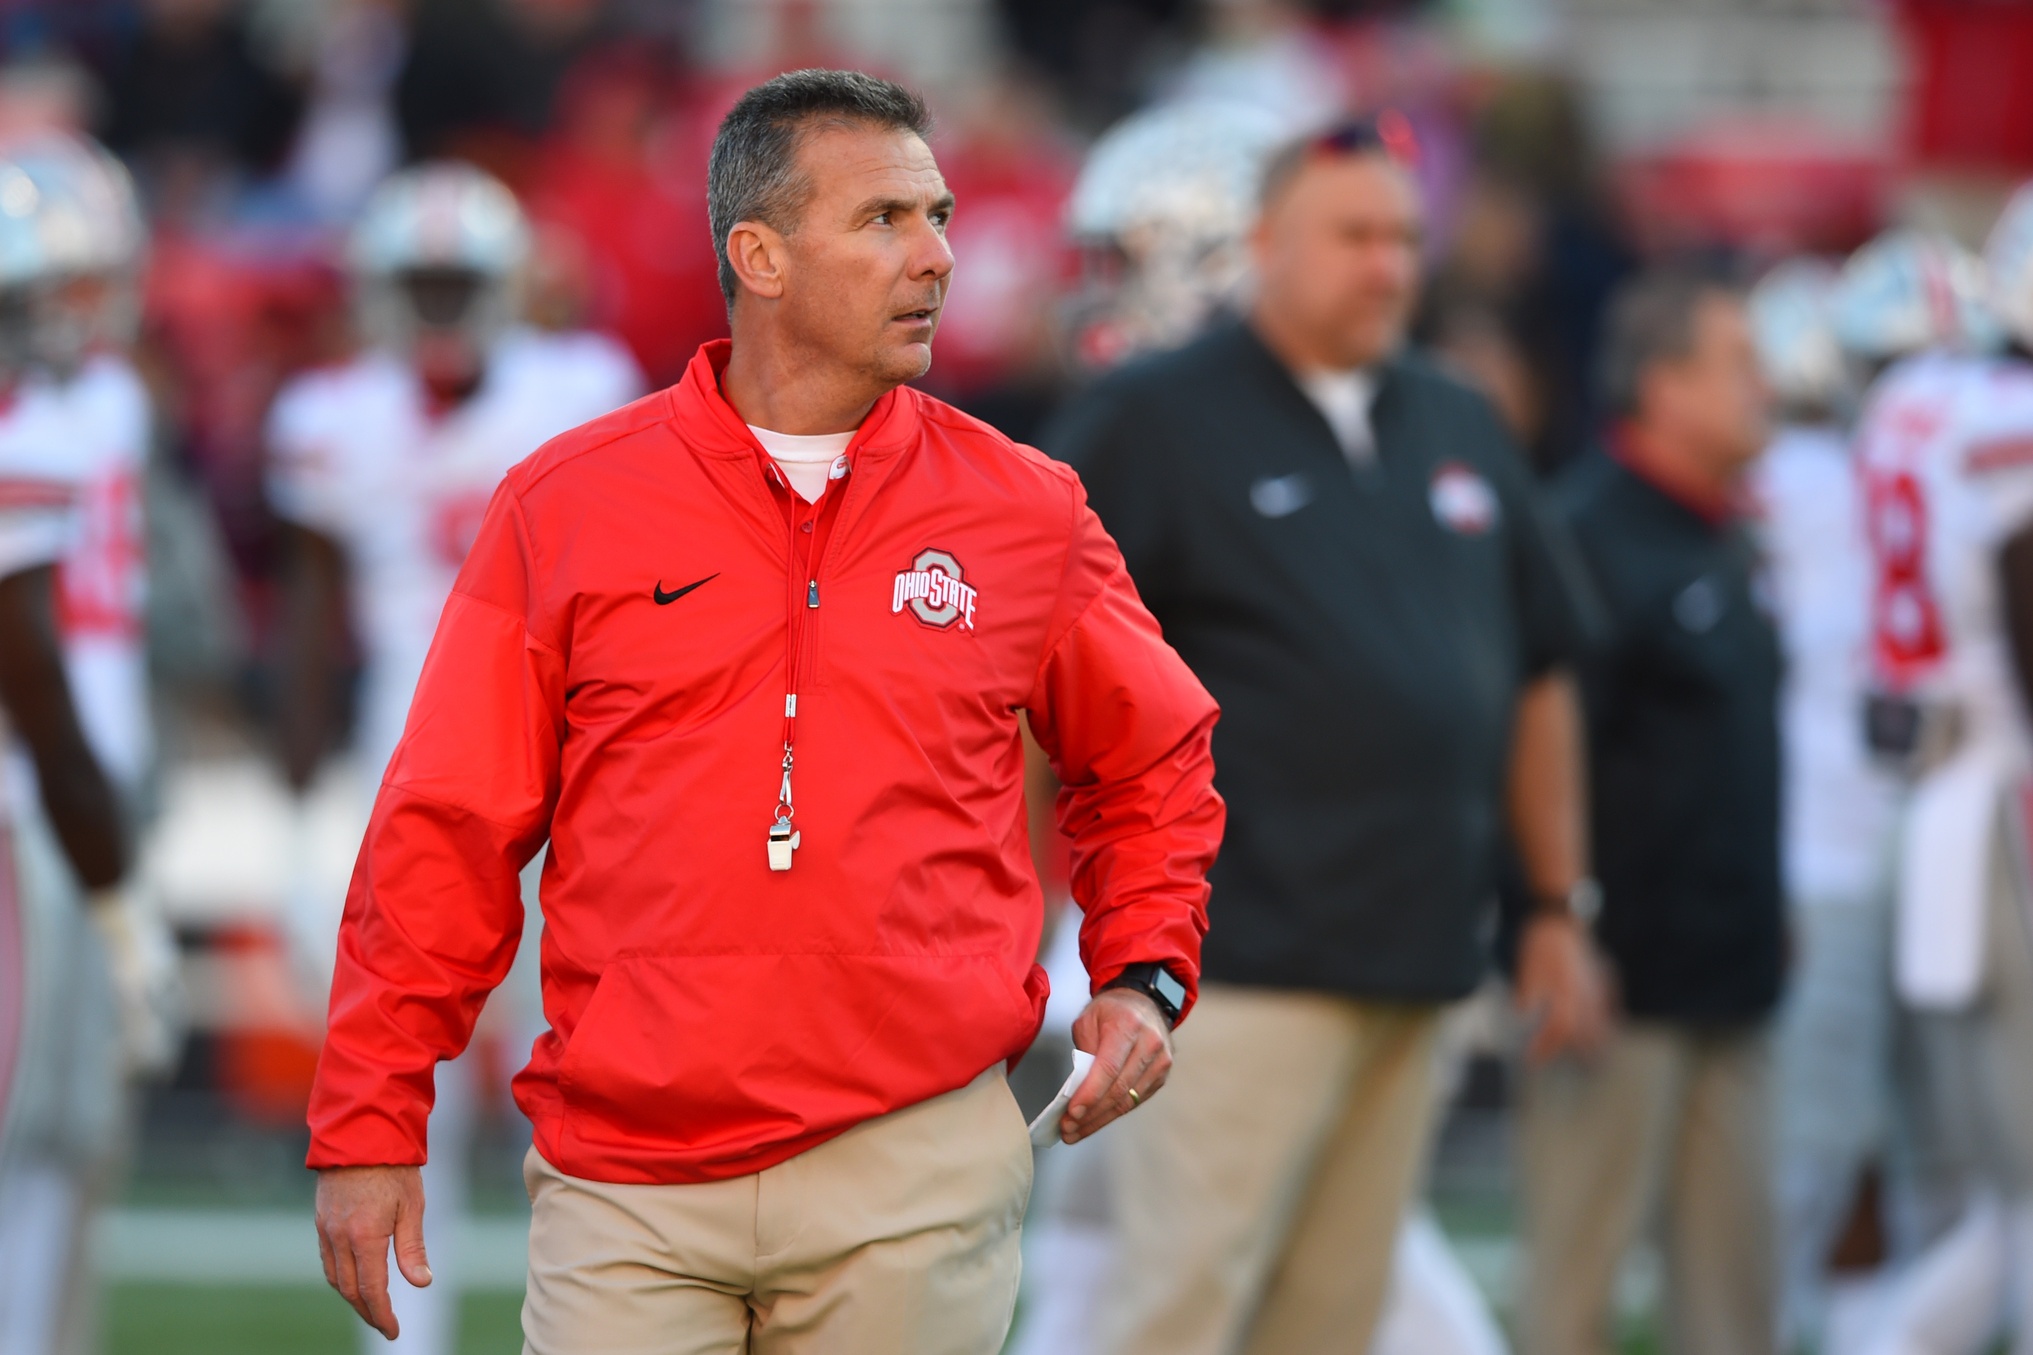 Nov 12, 2016; College Park, MD, USA; Ohio State Buckeyes head coach Urban Meyer walks across the field prior to the game against the Maryland Terrapins at Capital One Field at Maryland Stadium. Mandatory Credit: Tommy Gilligan-USA TODAY Sports